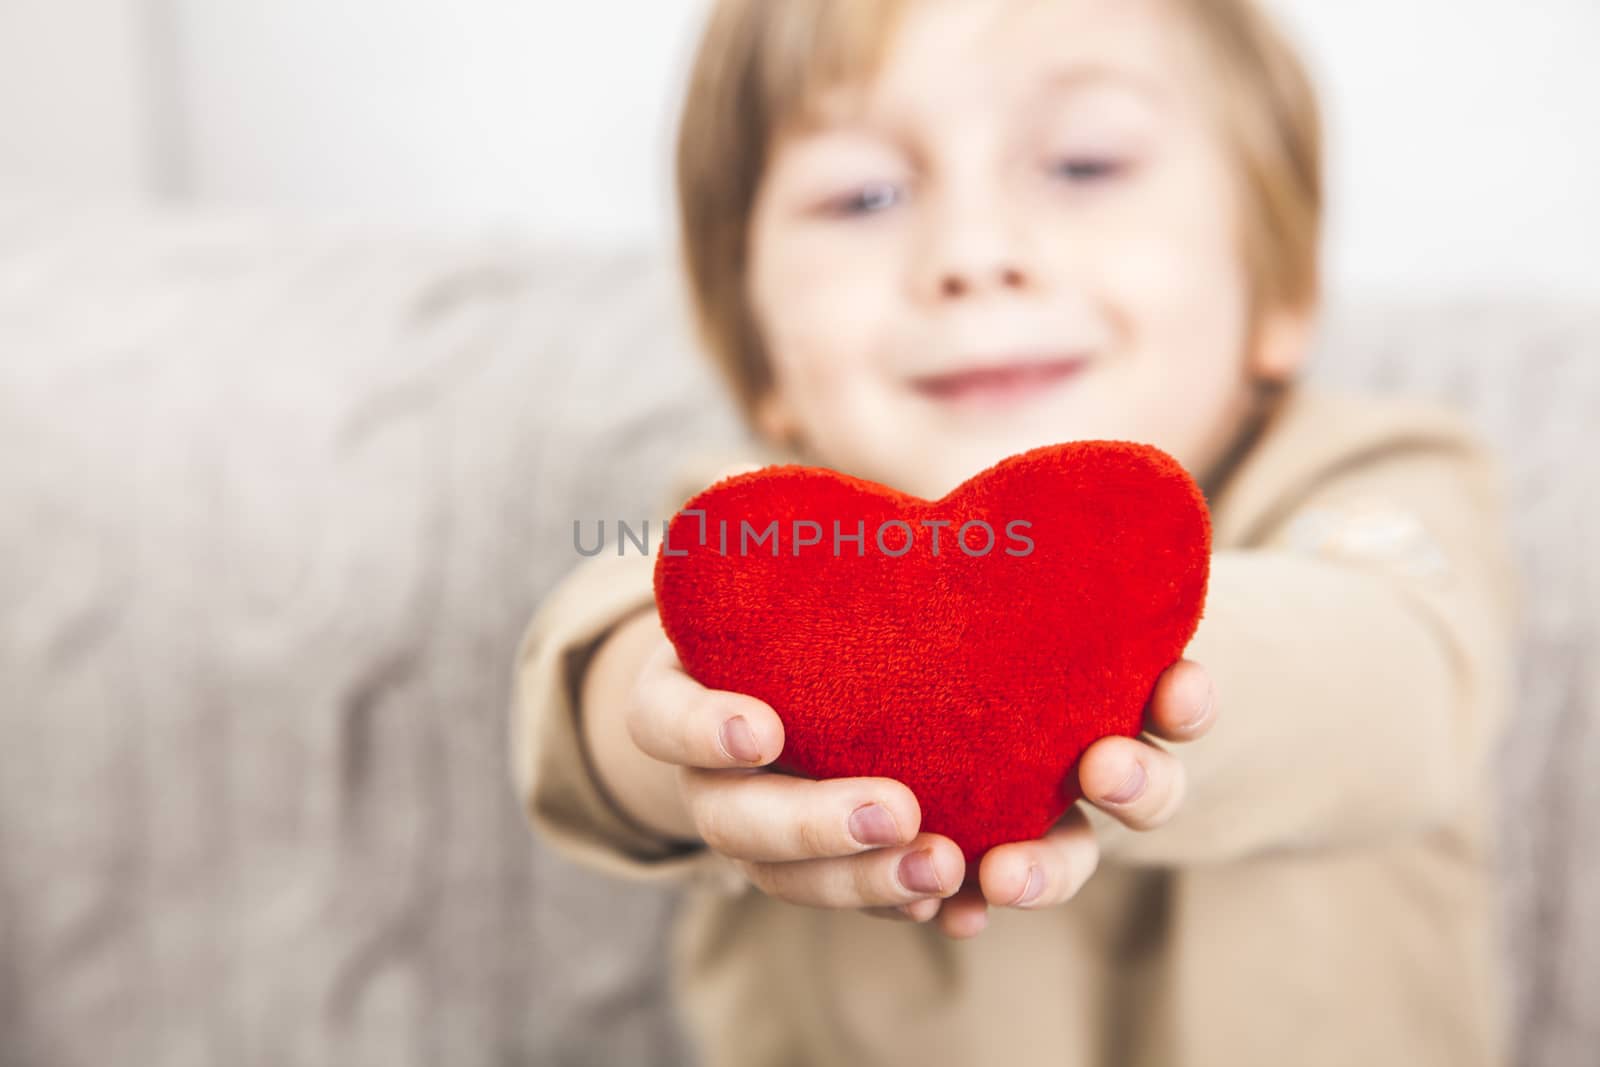 Cute young boy with a red heart in his hands